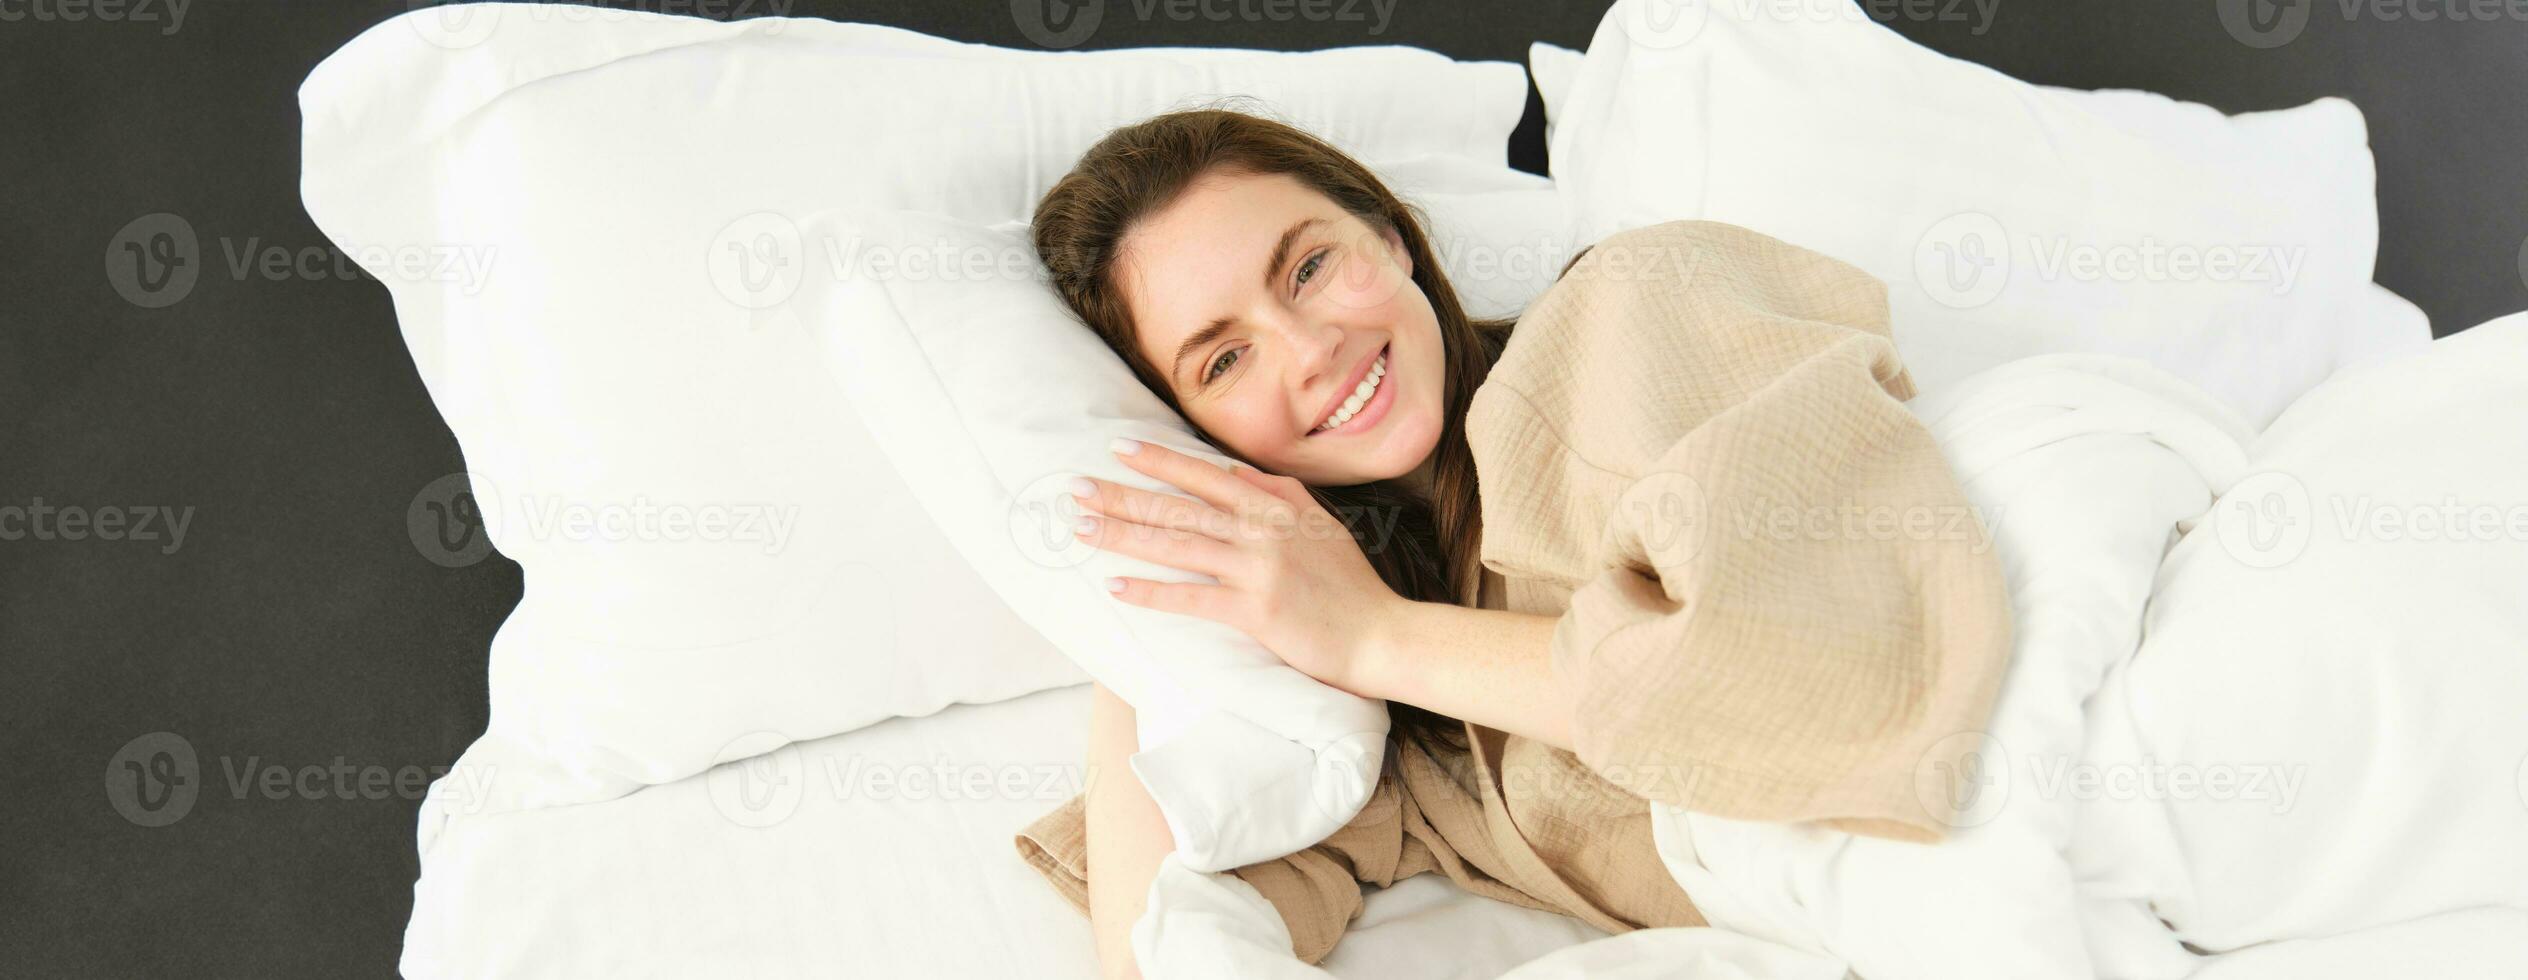 Gorgeous woman resting in hotel room, sleeping in bed, lying on pillow with eyes opened and smiling, having lazy morning photo